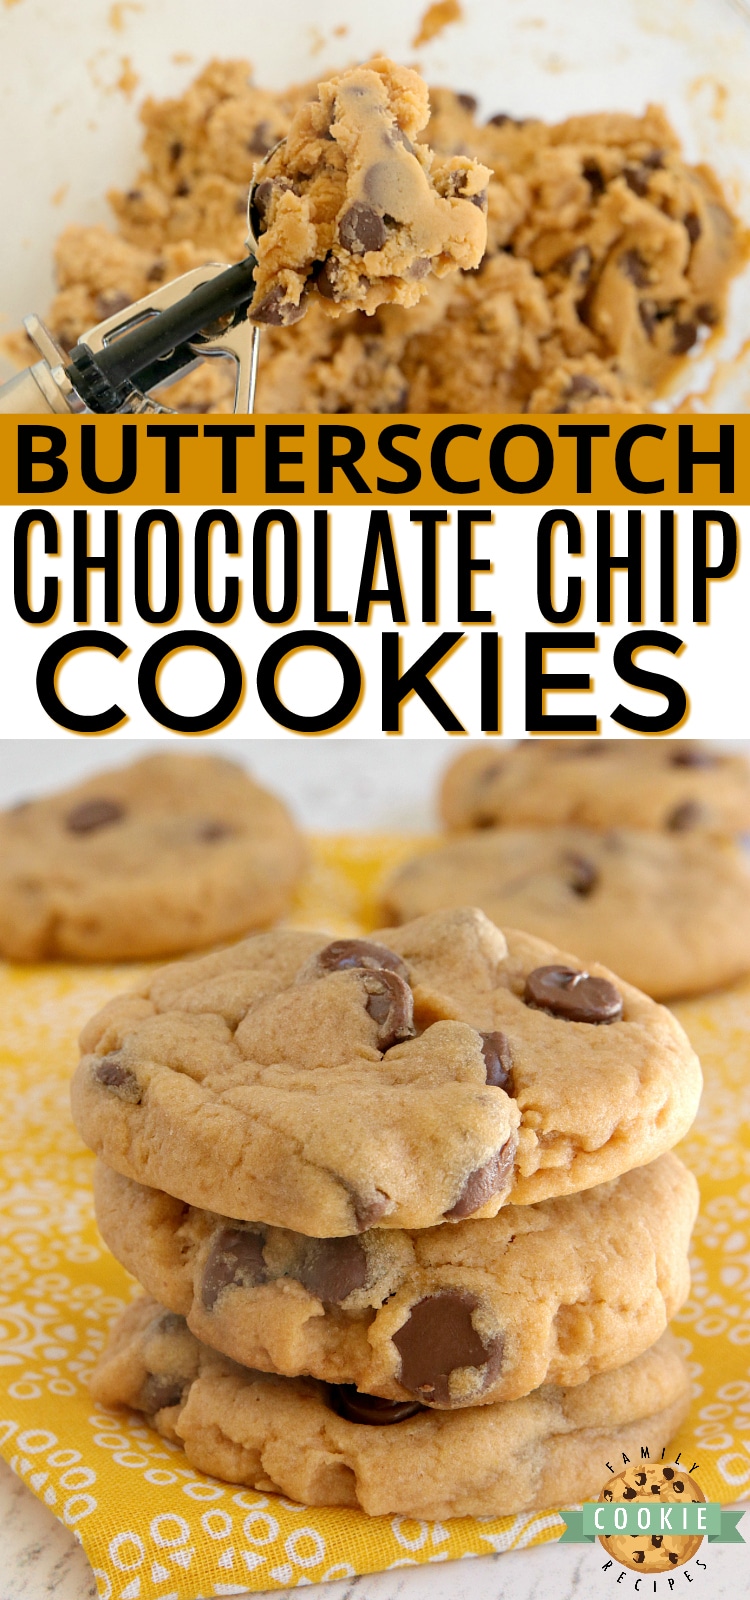 Butterscotch Chocolate Chip Cookies made with butterscotch pudding mix and milk chocolate chips. Amazingly soft and chewy cookies bursting with butterscotch flavor.